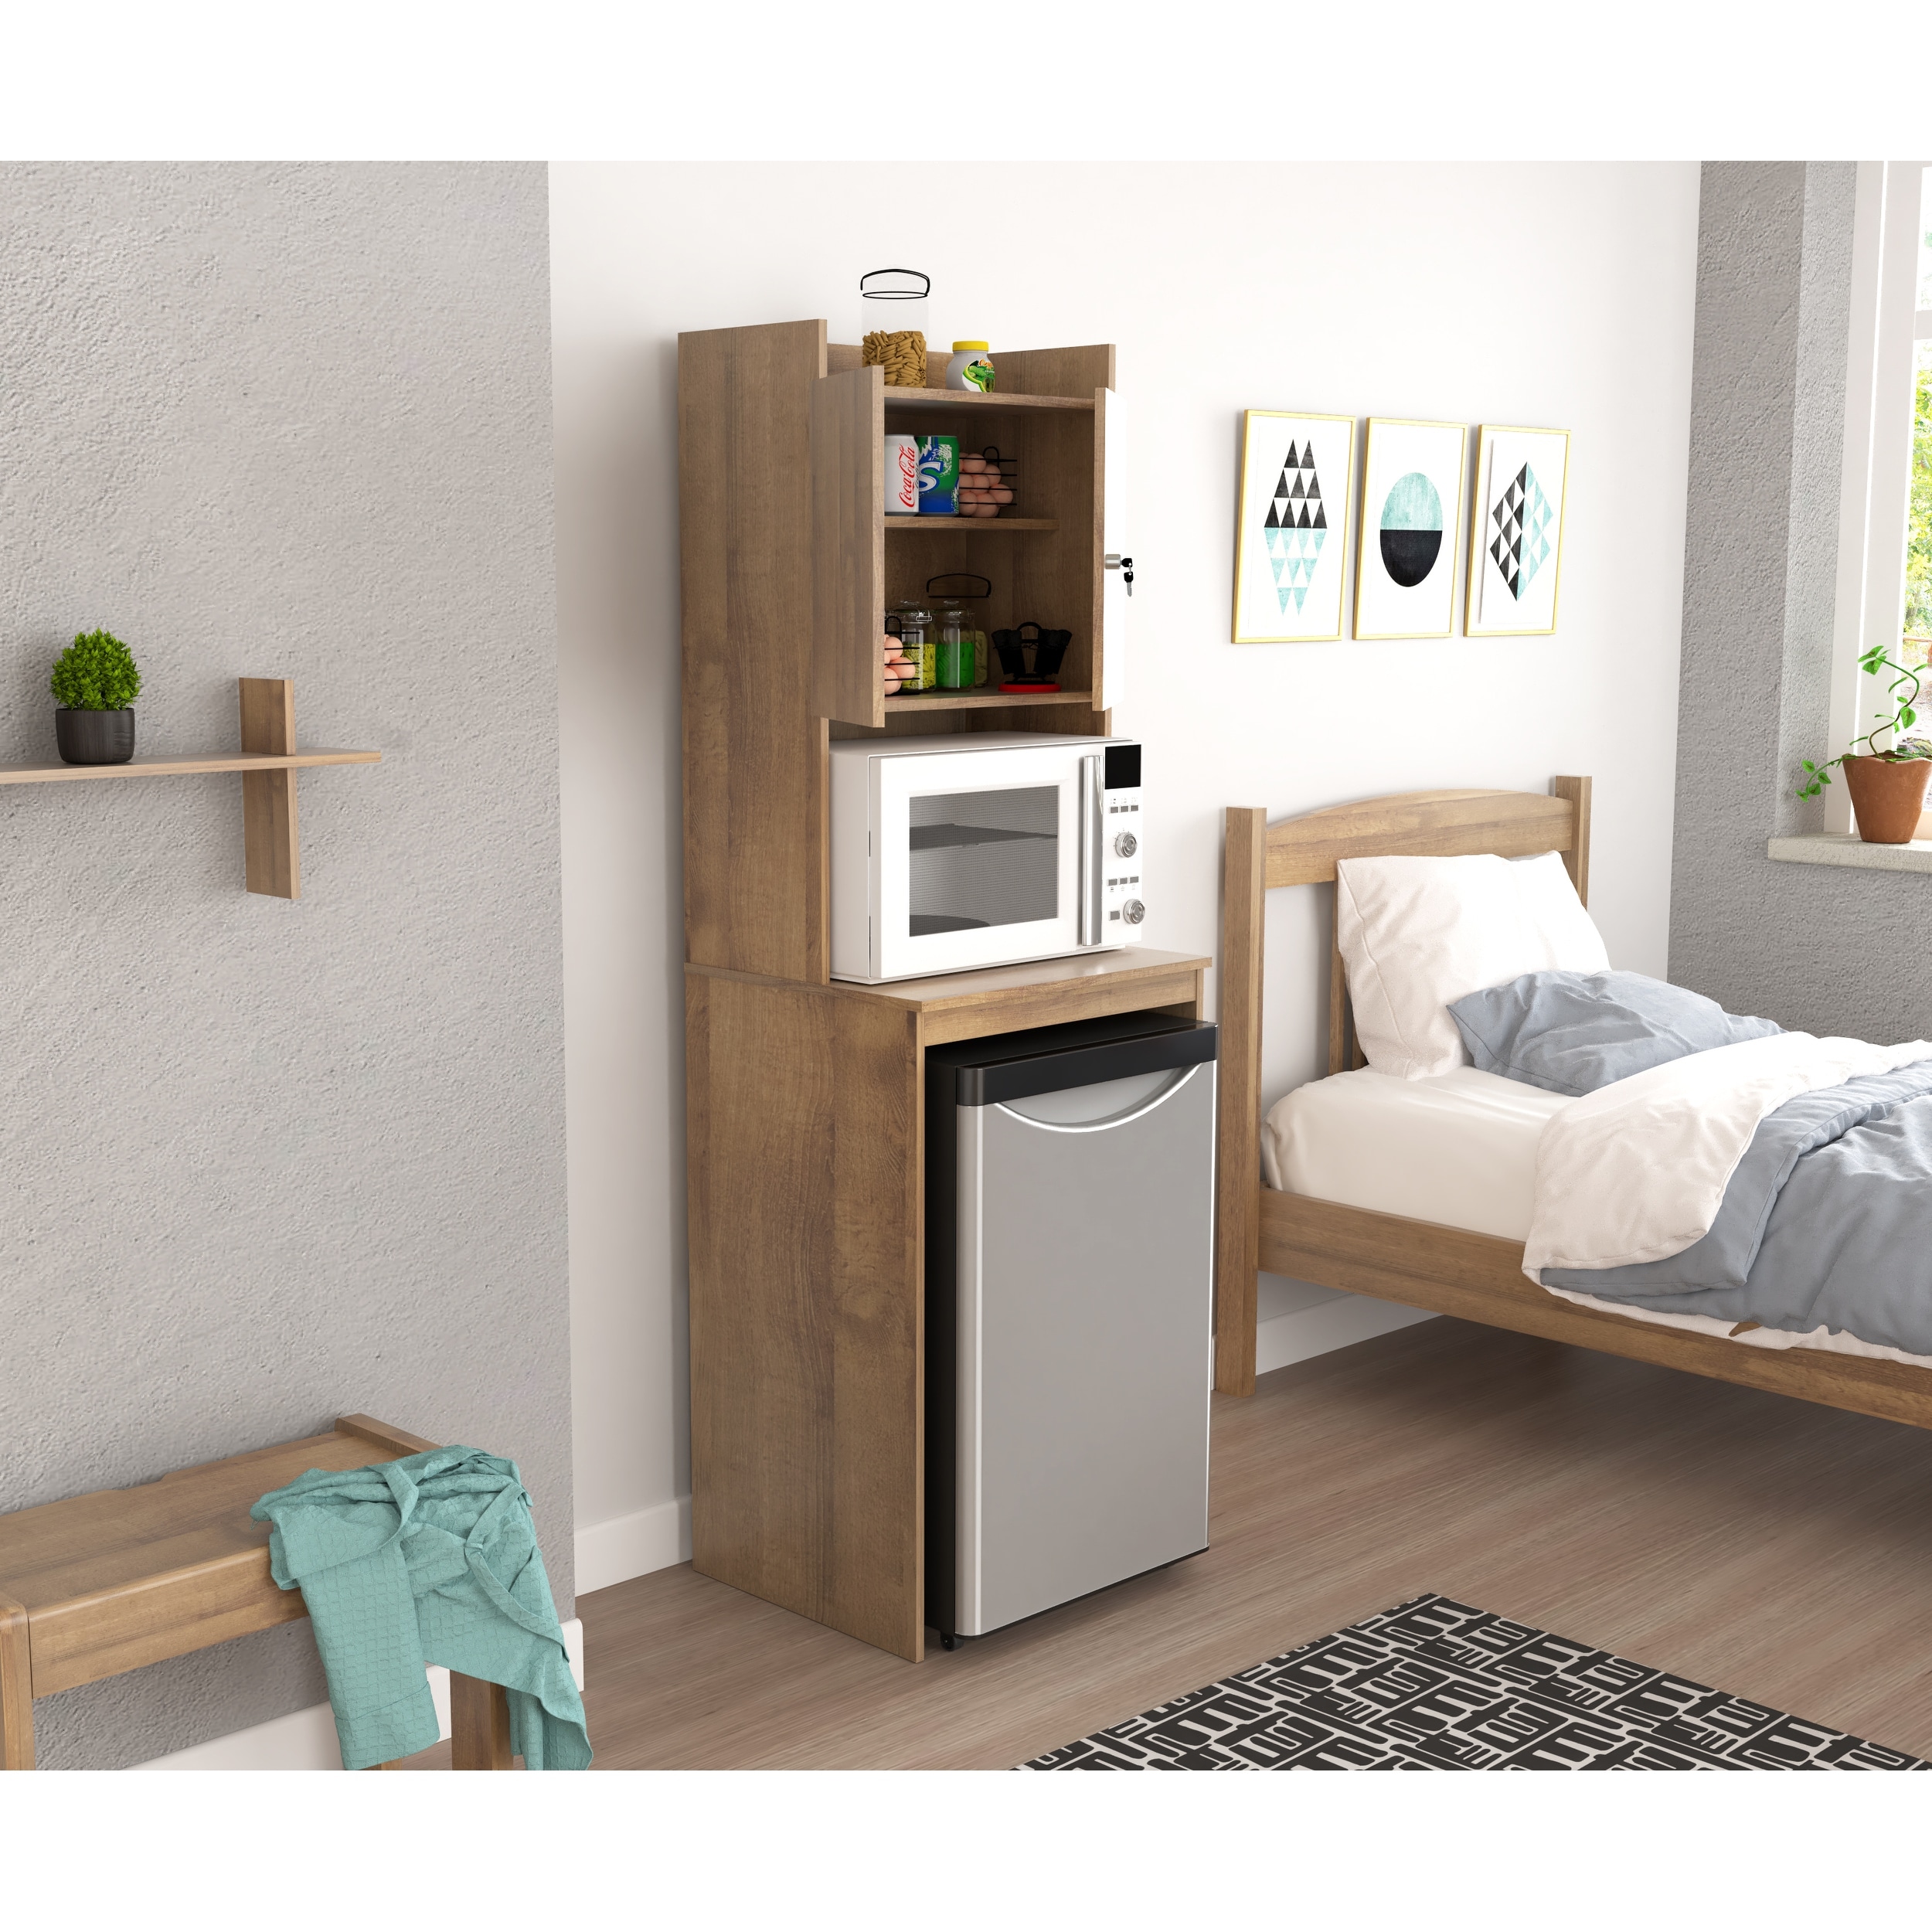 https://ak1.ostkcdn.com/images/products/is/images/direct/d5baa1bf5a039f8cf274dfaa9a09397f98a2e6f1/Inval-Mini-Refrigerator-and-Microwave-Storage-Cabinet.jpg